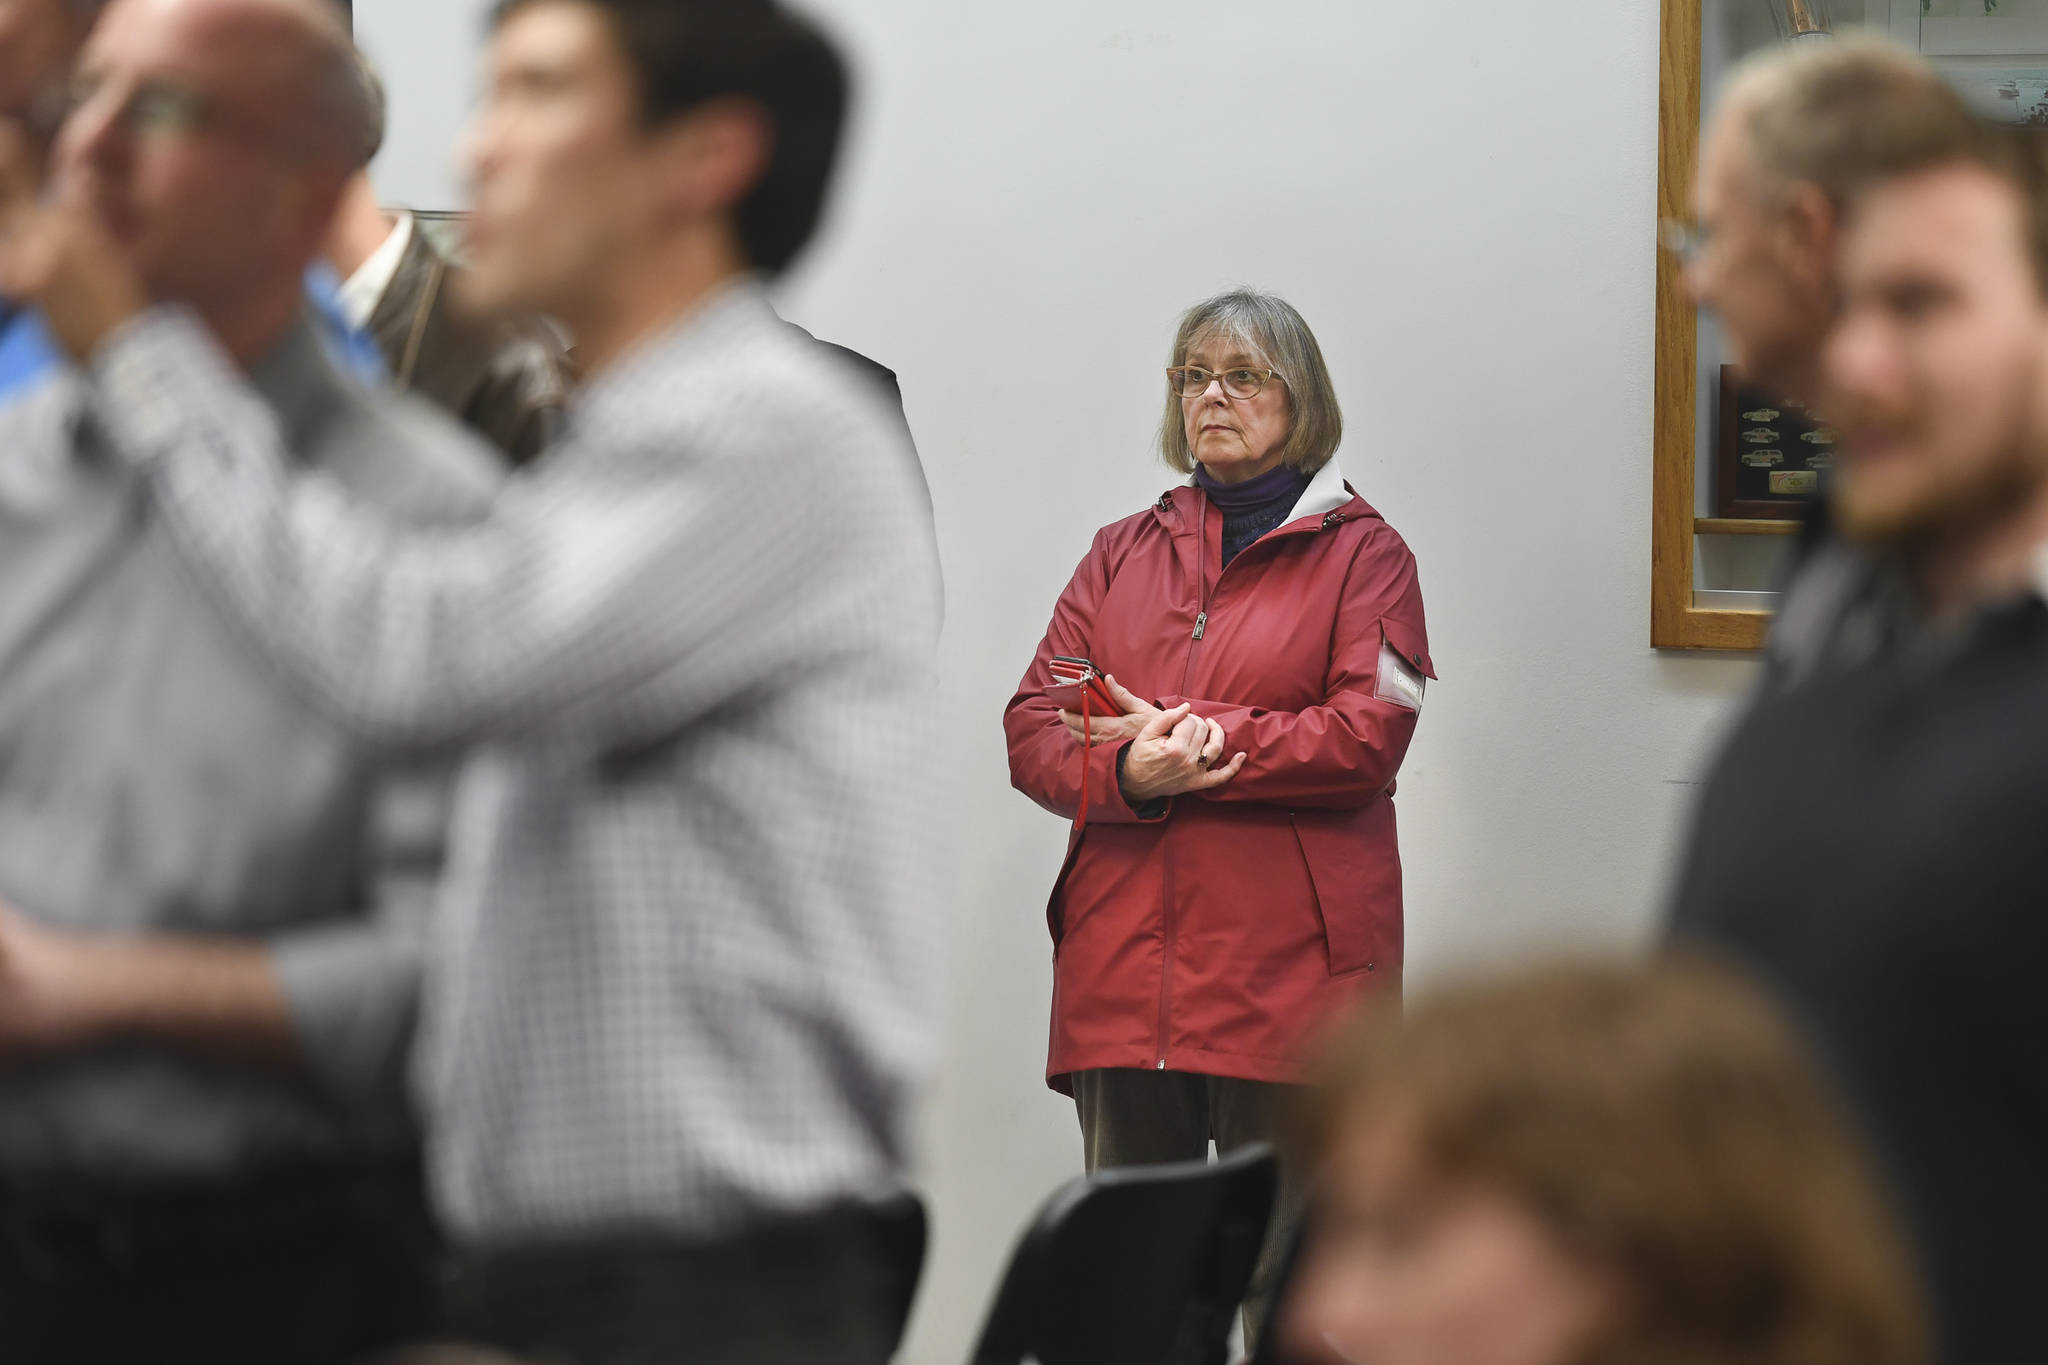 Nancy DeCherney, executive director of the Juneau Arts and Humanities Council, watches results come in at City Hall on Tuesday, Oct. 1, 2019. (Michael Penn | Juneau Empire)